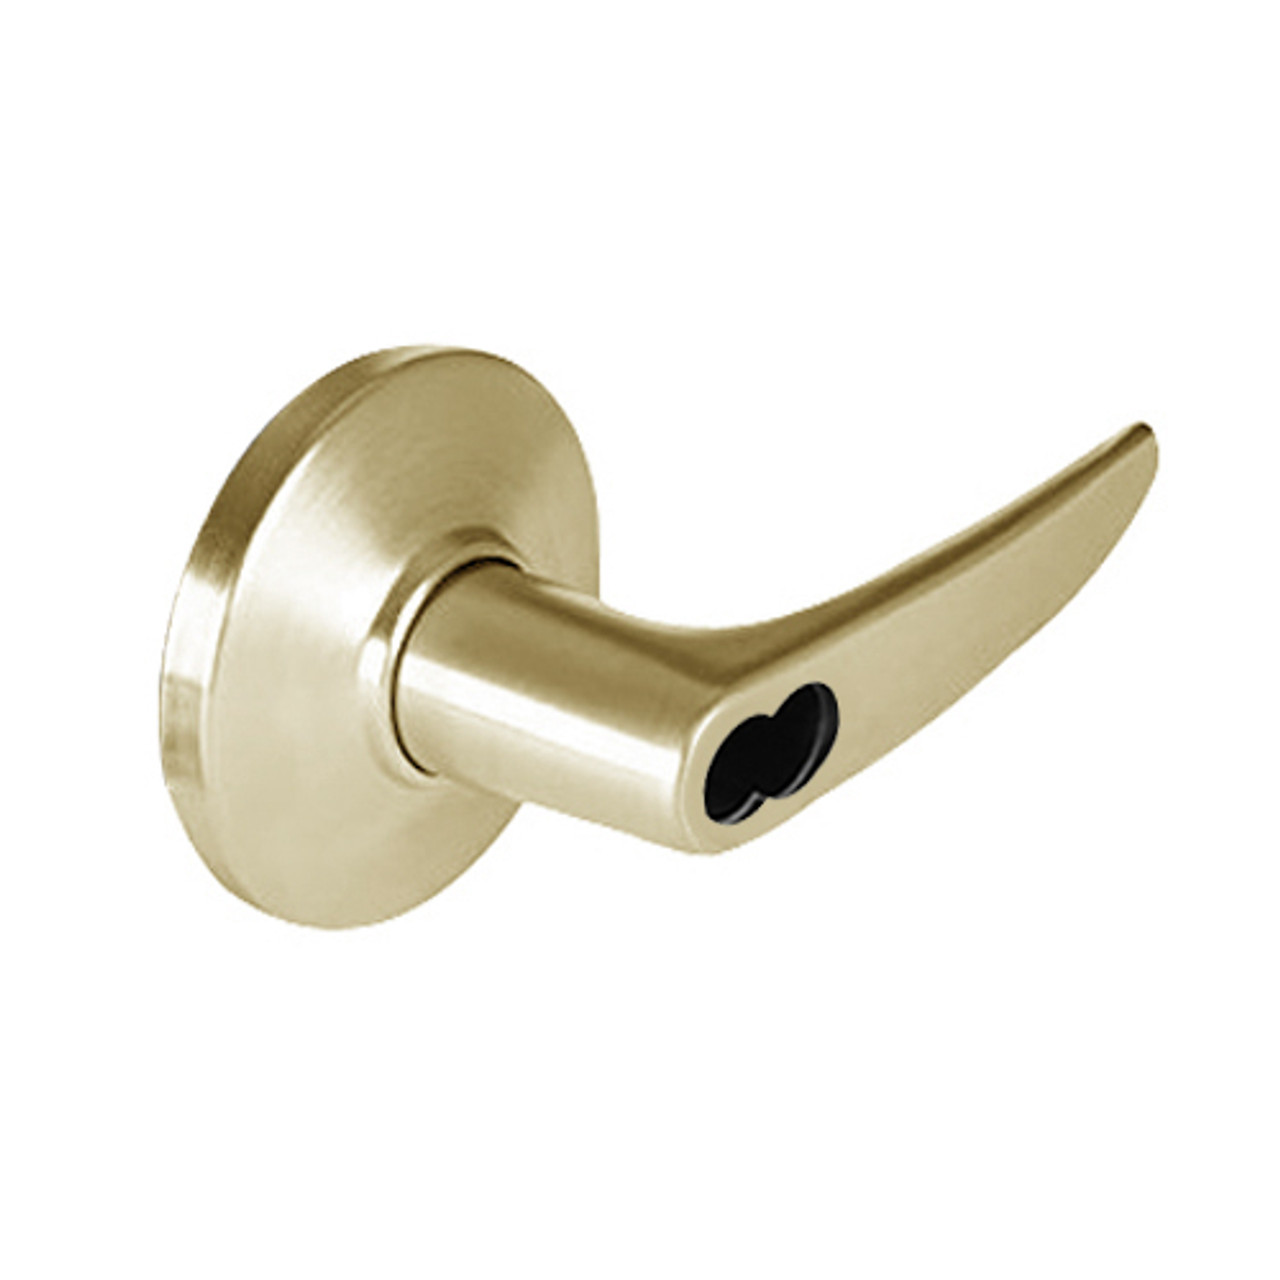 9K37YR16DSTK606 Best 9K Series Special Function Cylindrical Lever Locks with Curved without Return Lever Design Accept 7 Pin Best Core in Satin Brass